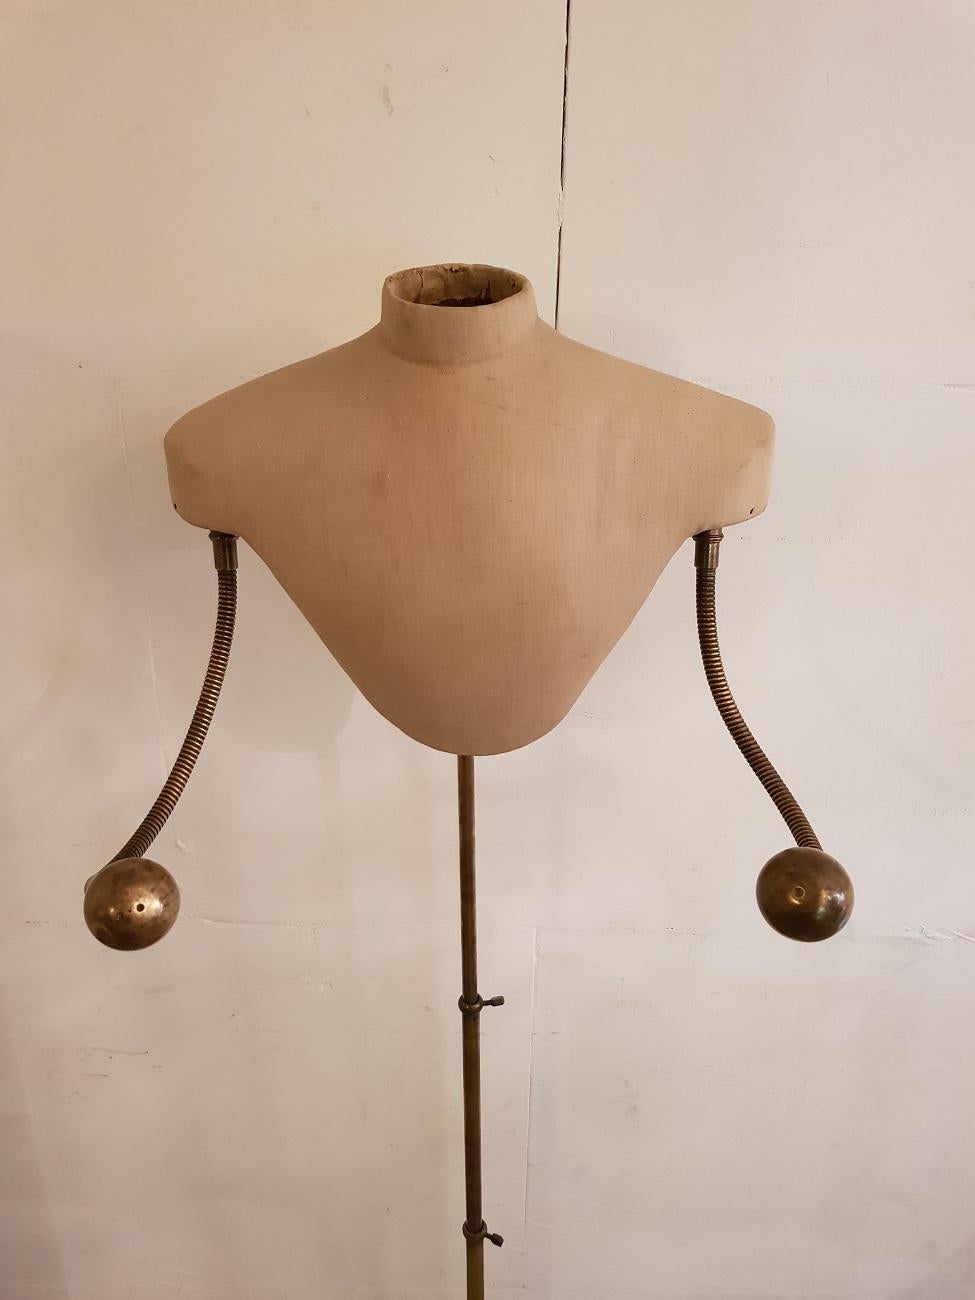 Old French unique mannequin model from the late 19th-early 20th century with adjustable arms and hands, standing on a cast iron base with extendable brass frame.

The measurements are,
Depth 18 cm/ 7 inch.
Width 50 cm/ 19.6 inch.
Height max.